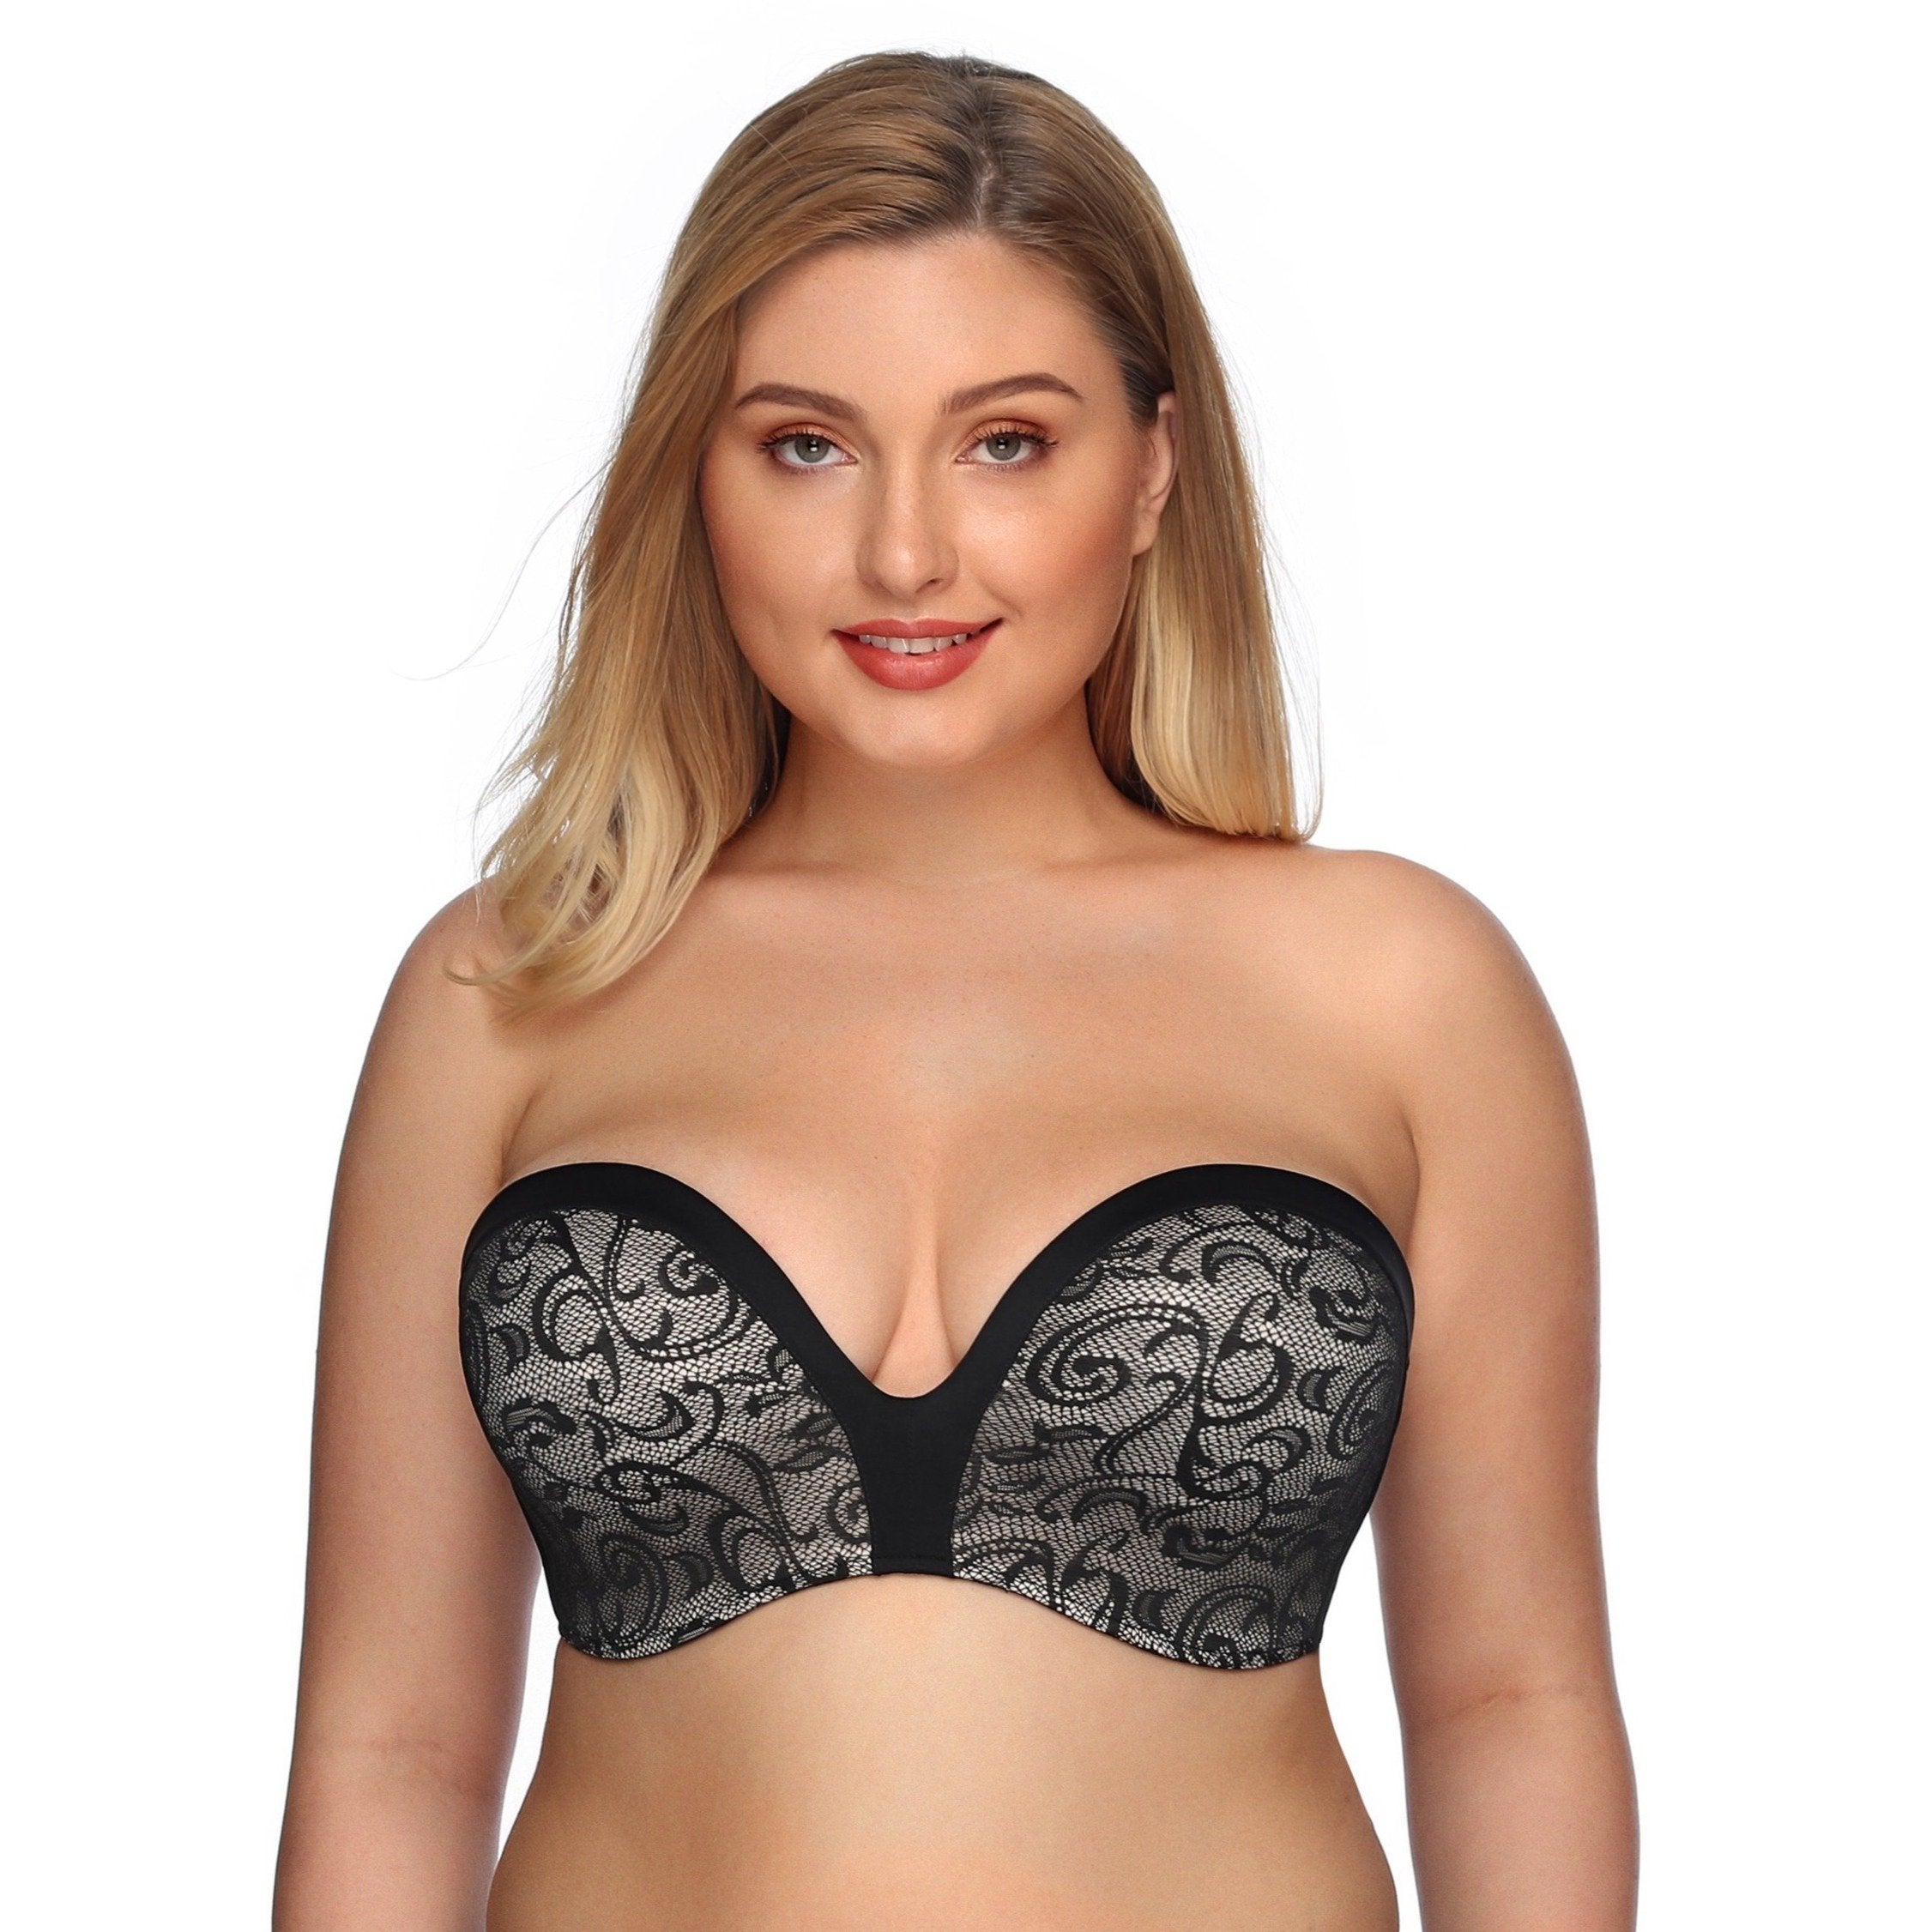 Women's Slightly Padded Push Up Great Support Lace Strapless Bra